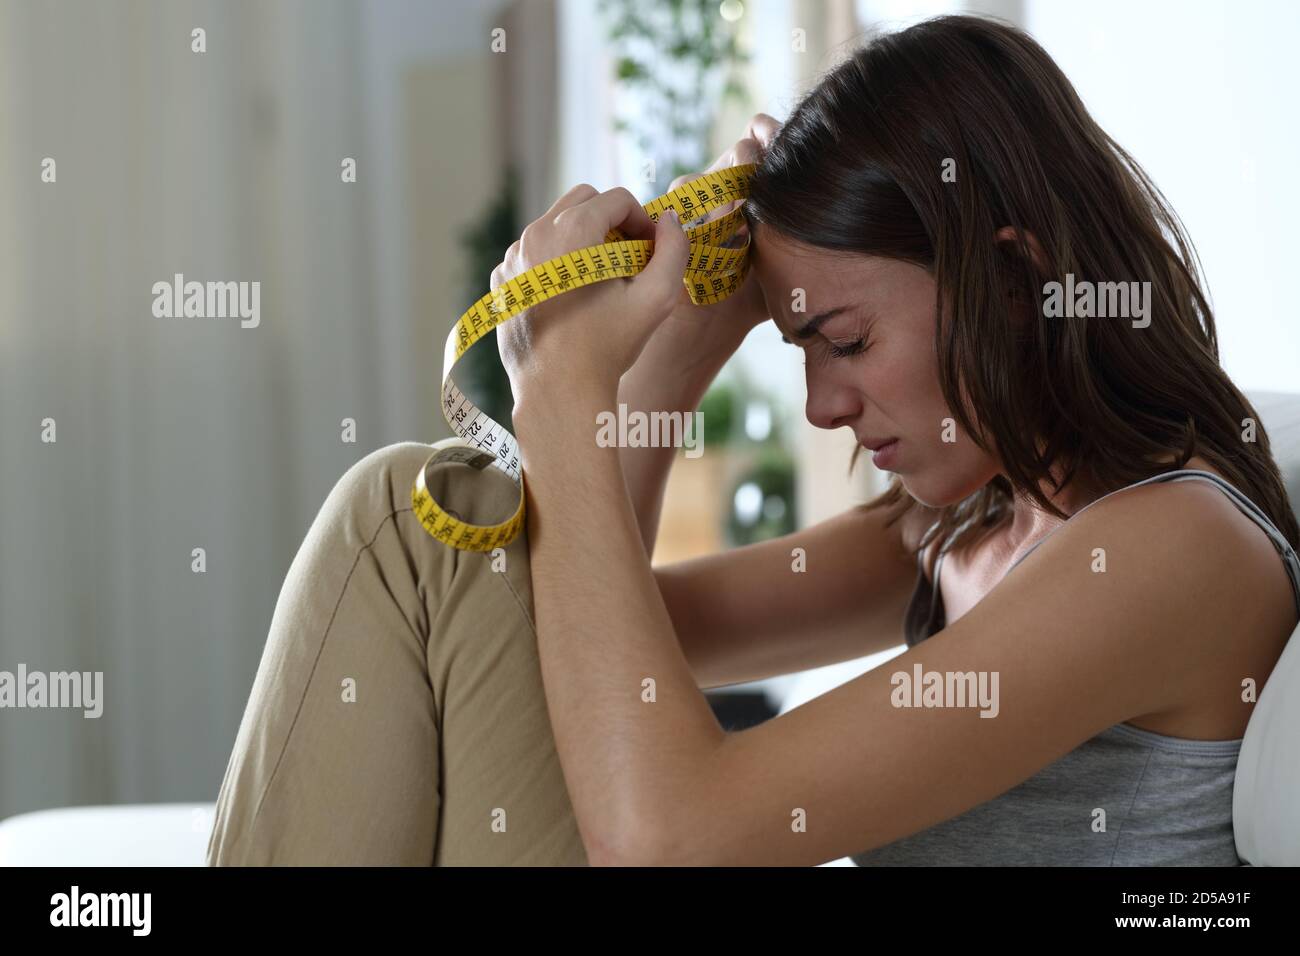 Profile of a sad woman obsessed with diet complaining sitting at home Stock Photo